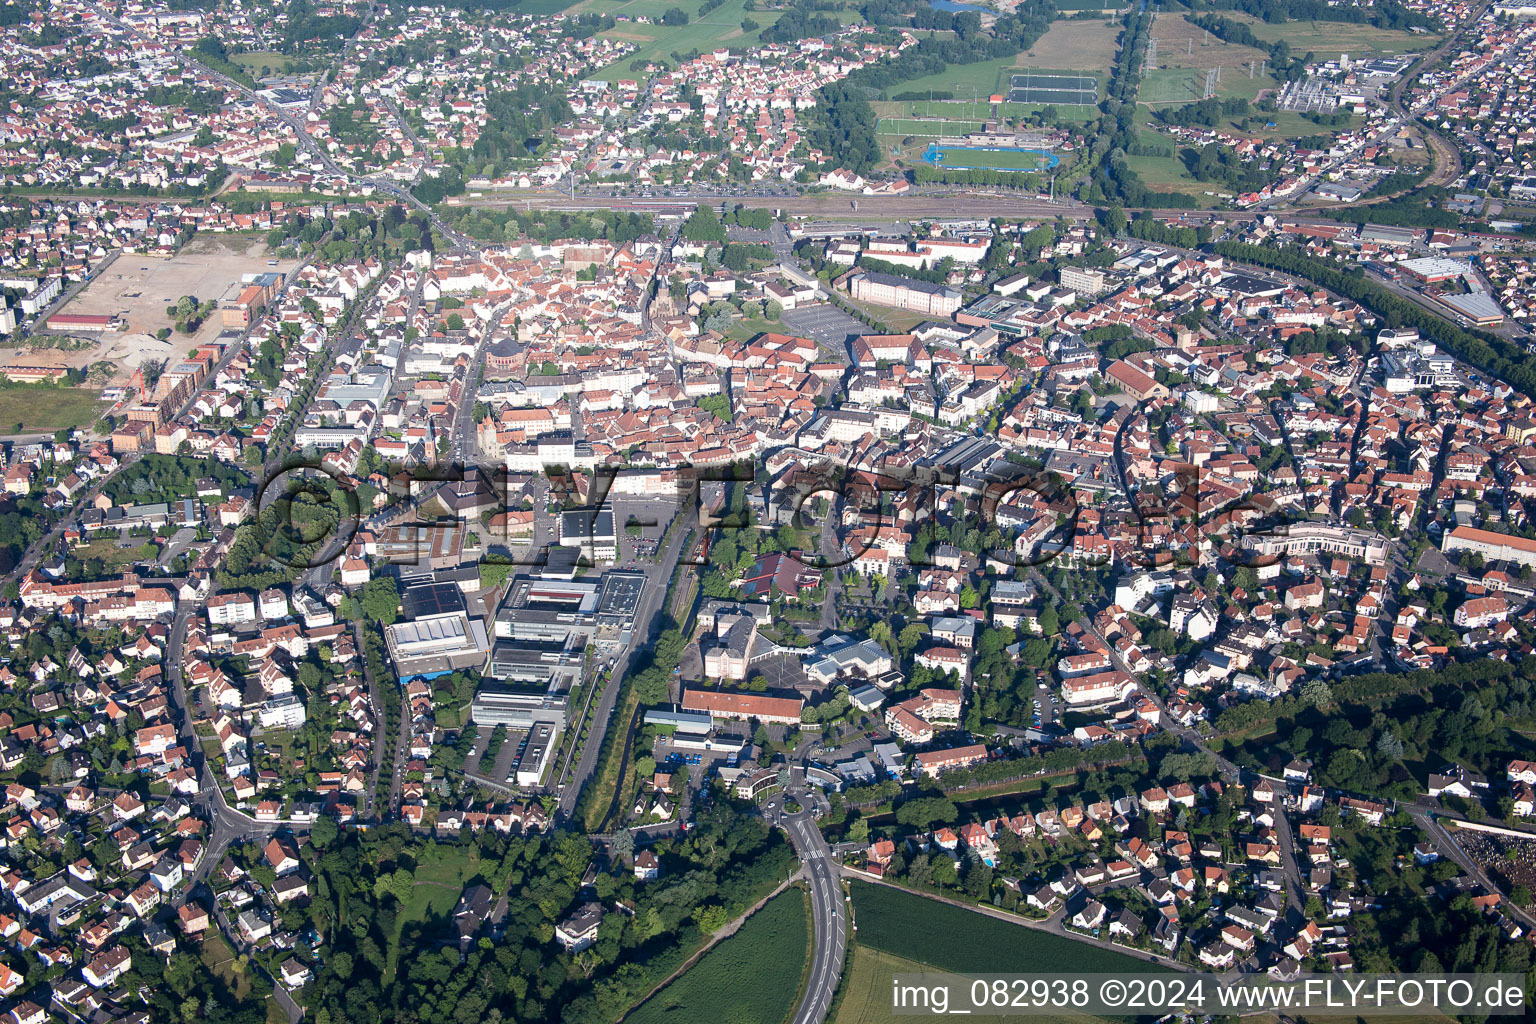 Town View of the streets and houses of the residential areas in Haguenau in Grand Est, France